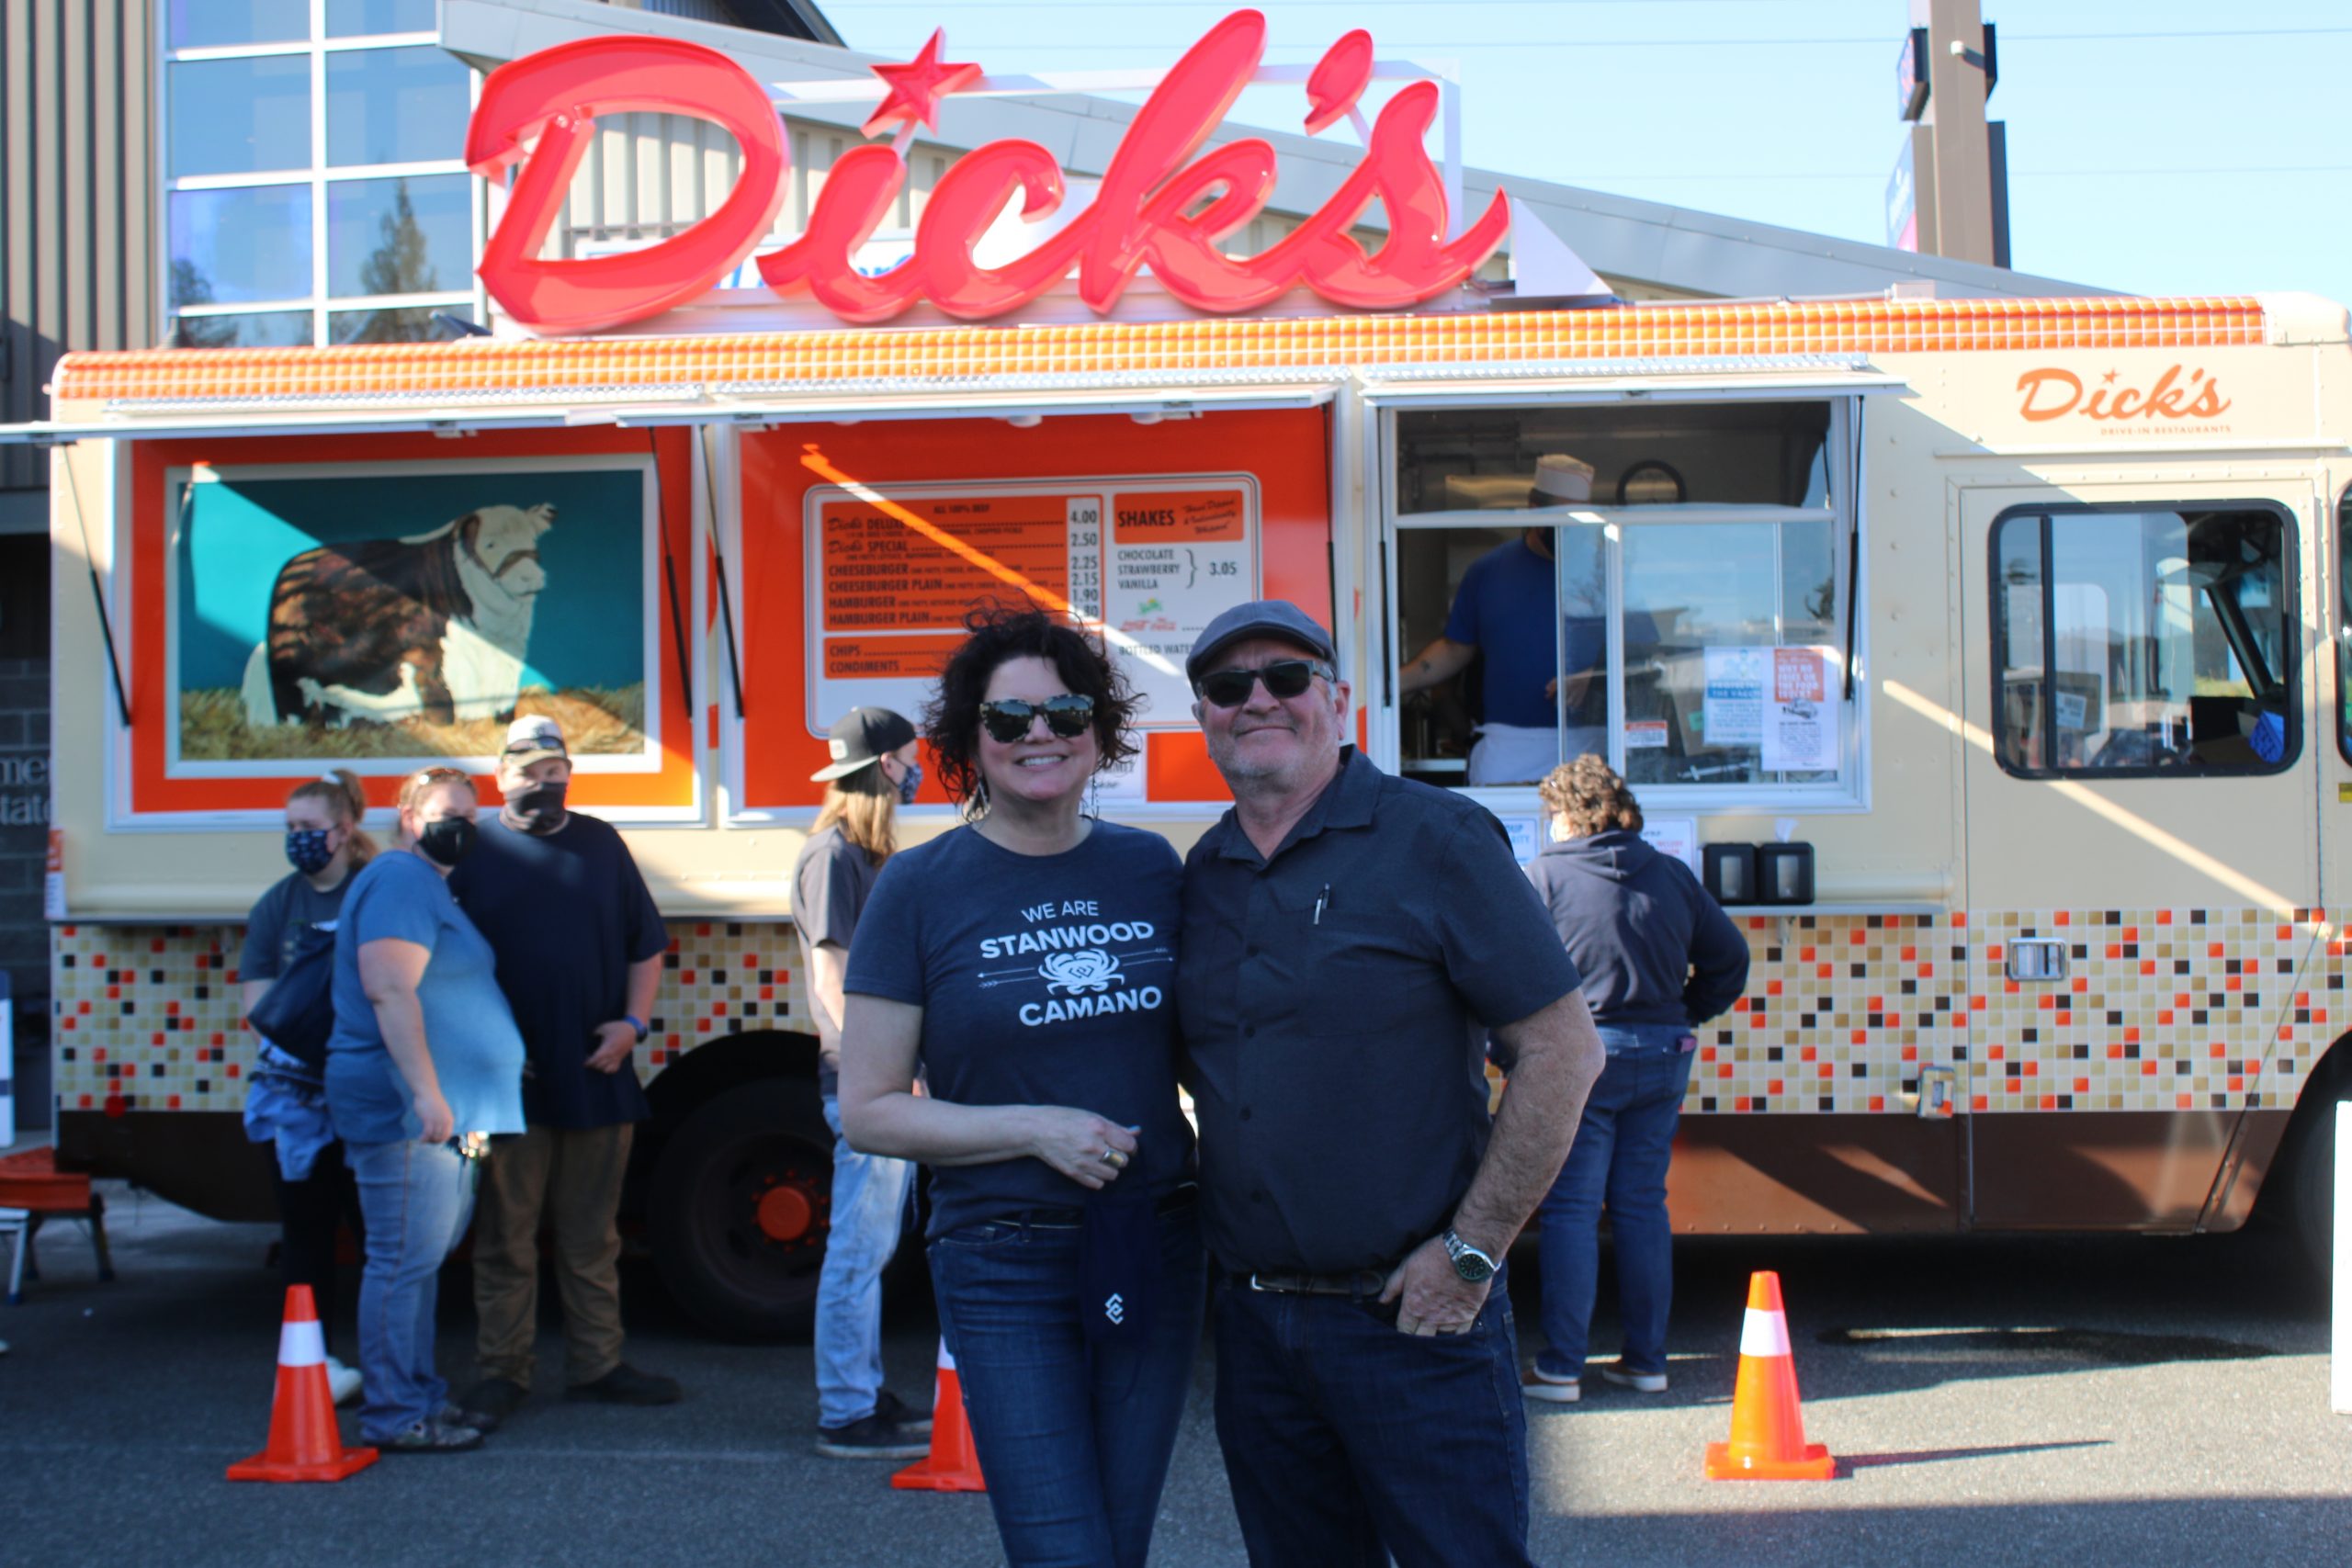 A man and a woman stand together in front of a food truck.